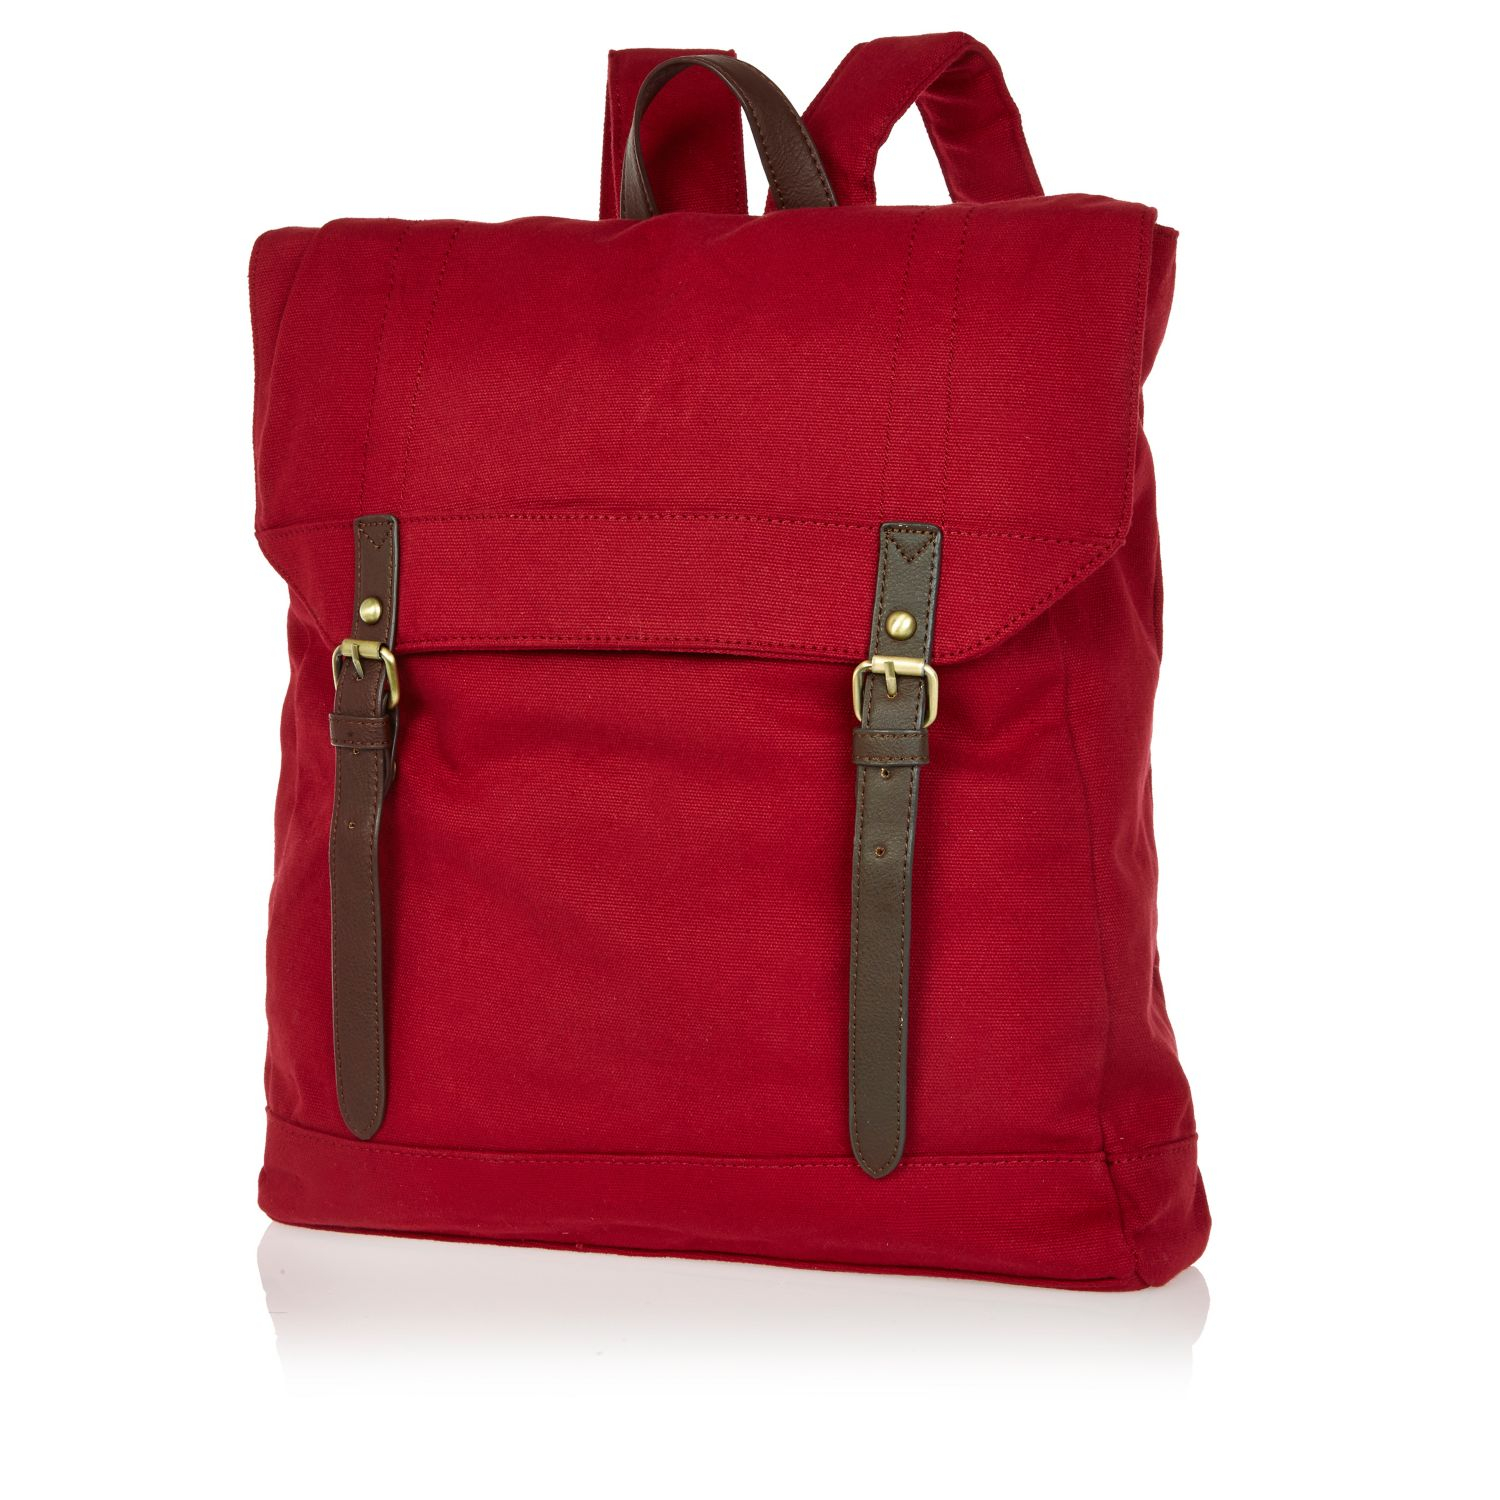 Lyst - River Island Dark Red Canvas Square Backpack in Red for Men